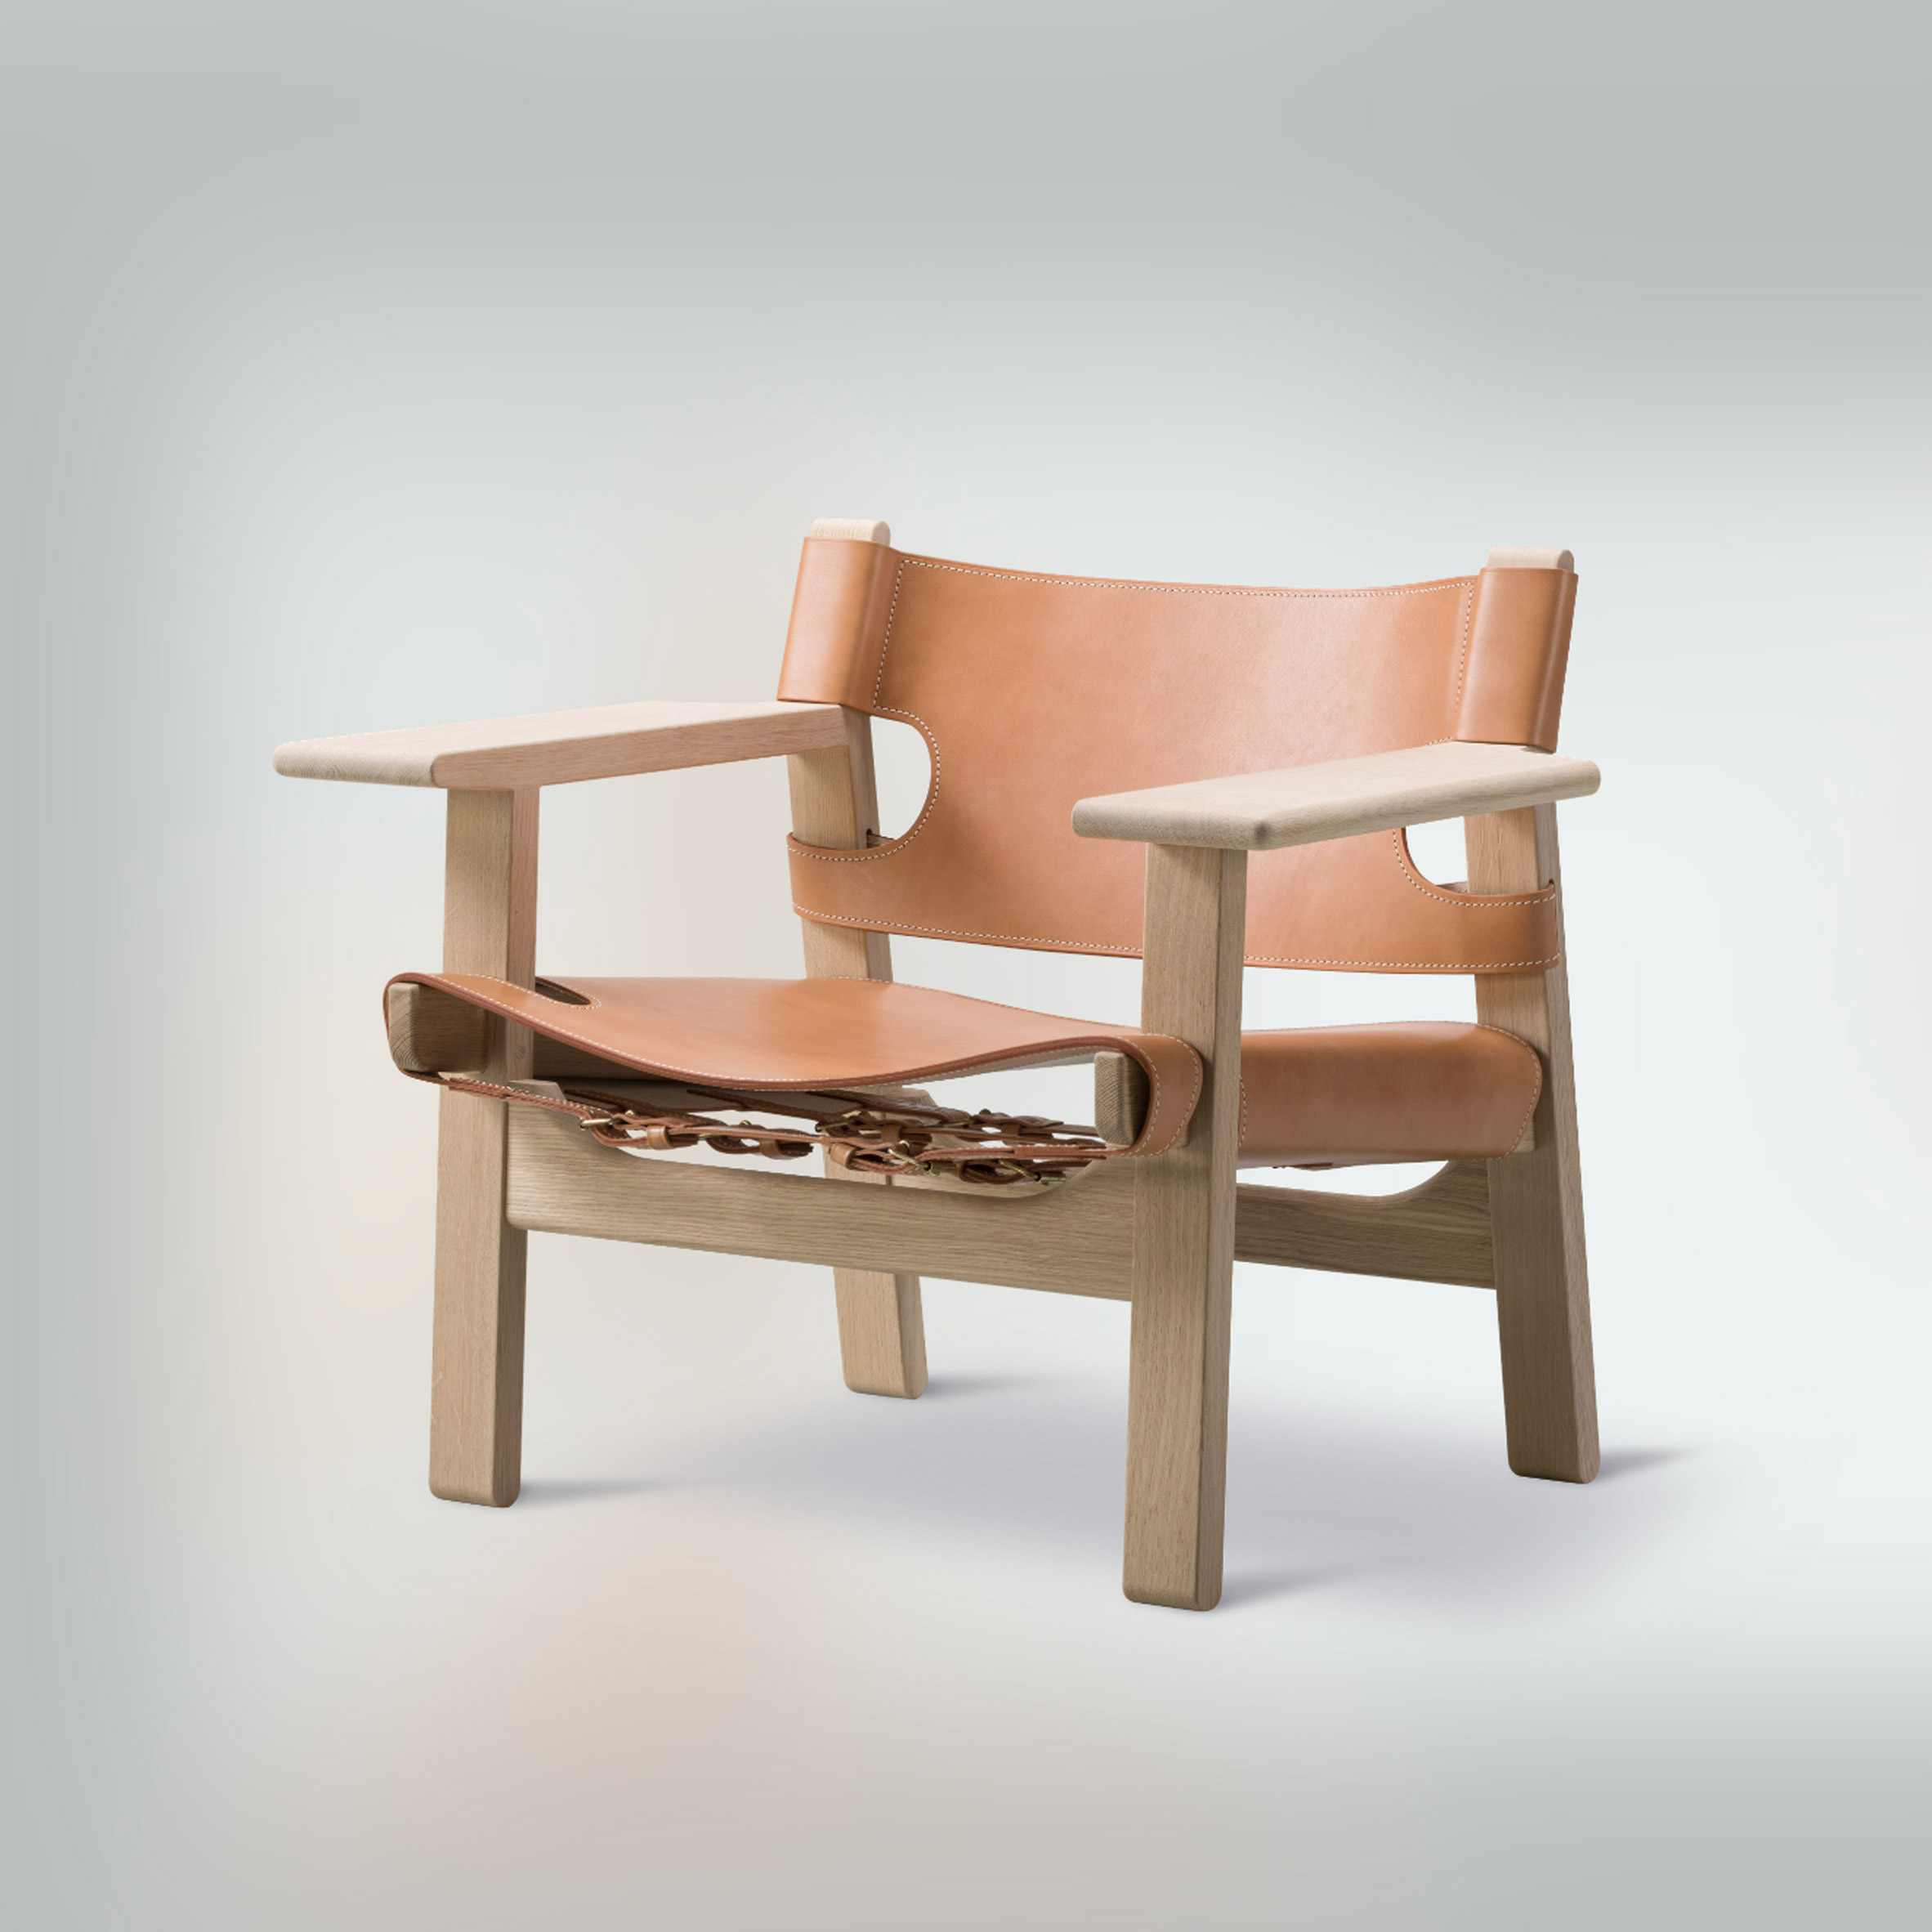 Side view of the Spanish Chair by Børge Mogensen for Danish brand Fredericia